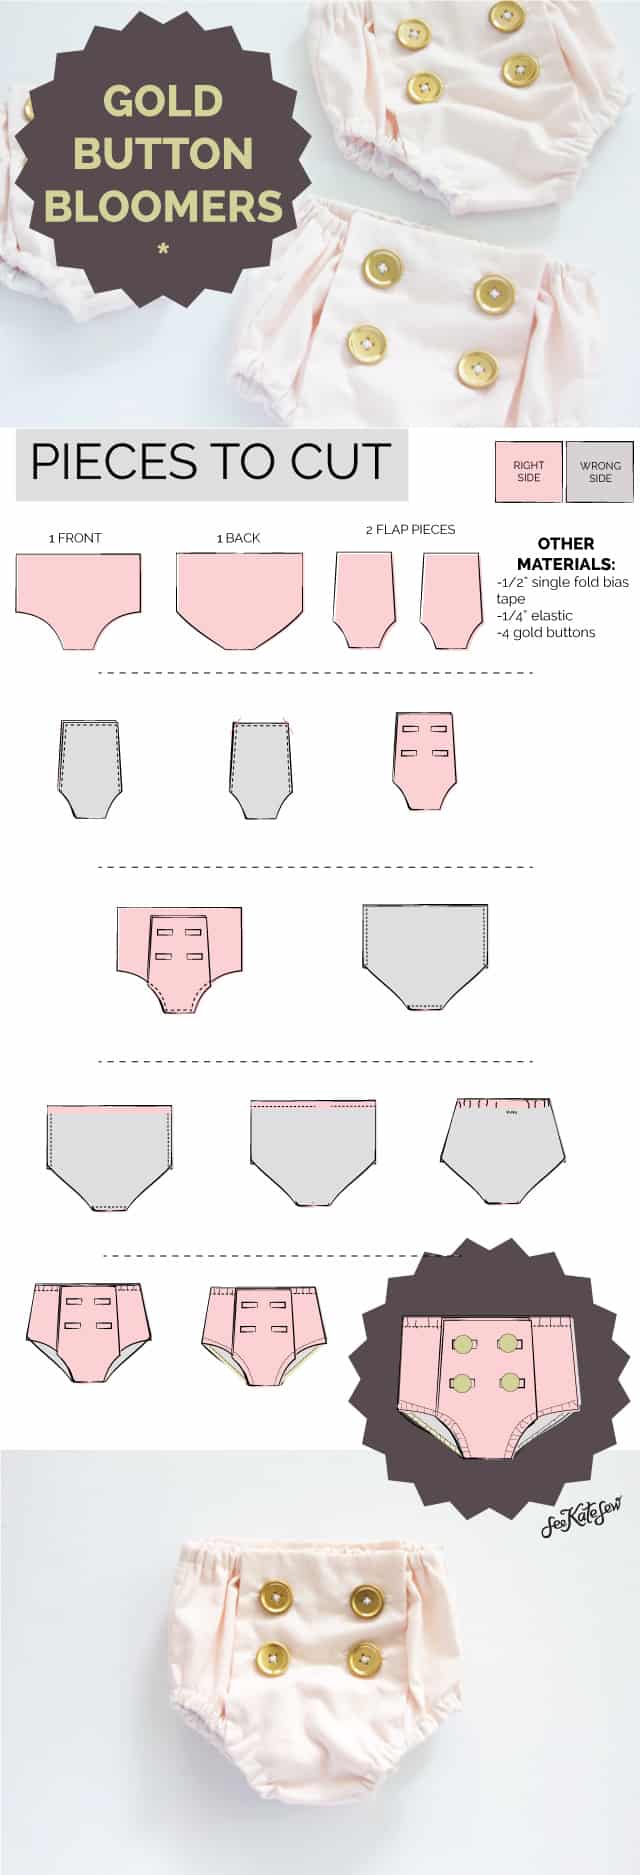 GOLD BUTTON BLOOMERS | FREE PATTERN | diy baby bloomers | diy baby clothing | handmade baby clothing | baby bloomer pattern || See Kate Sew #diybaby #freepattern #sewingtips